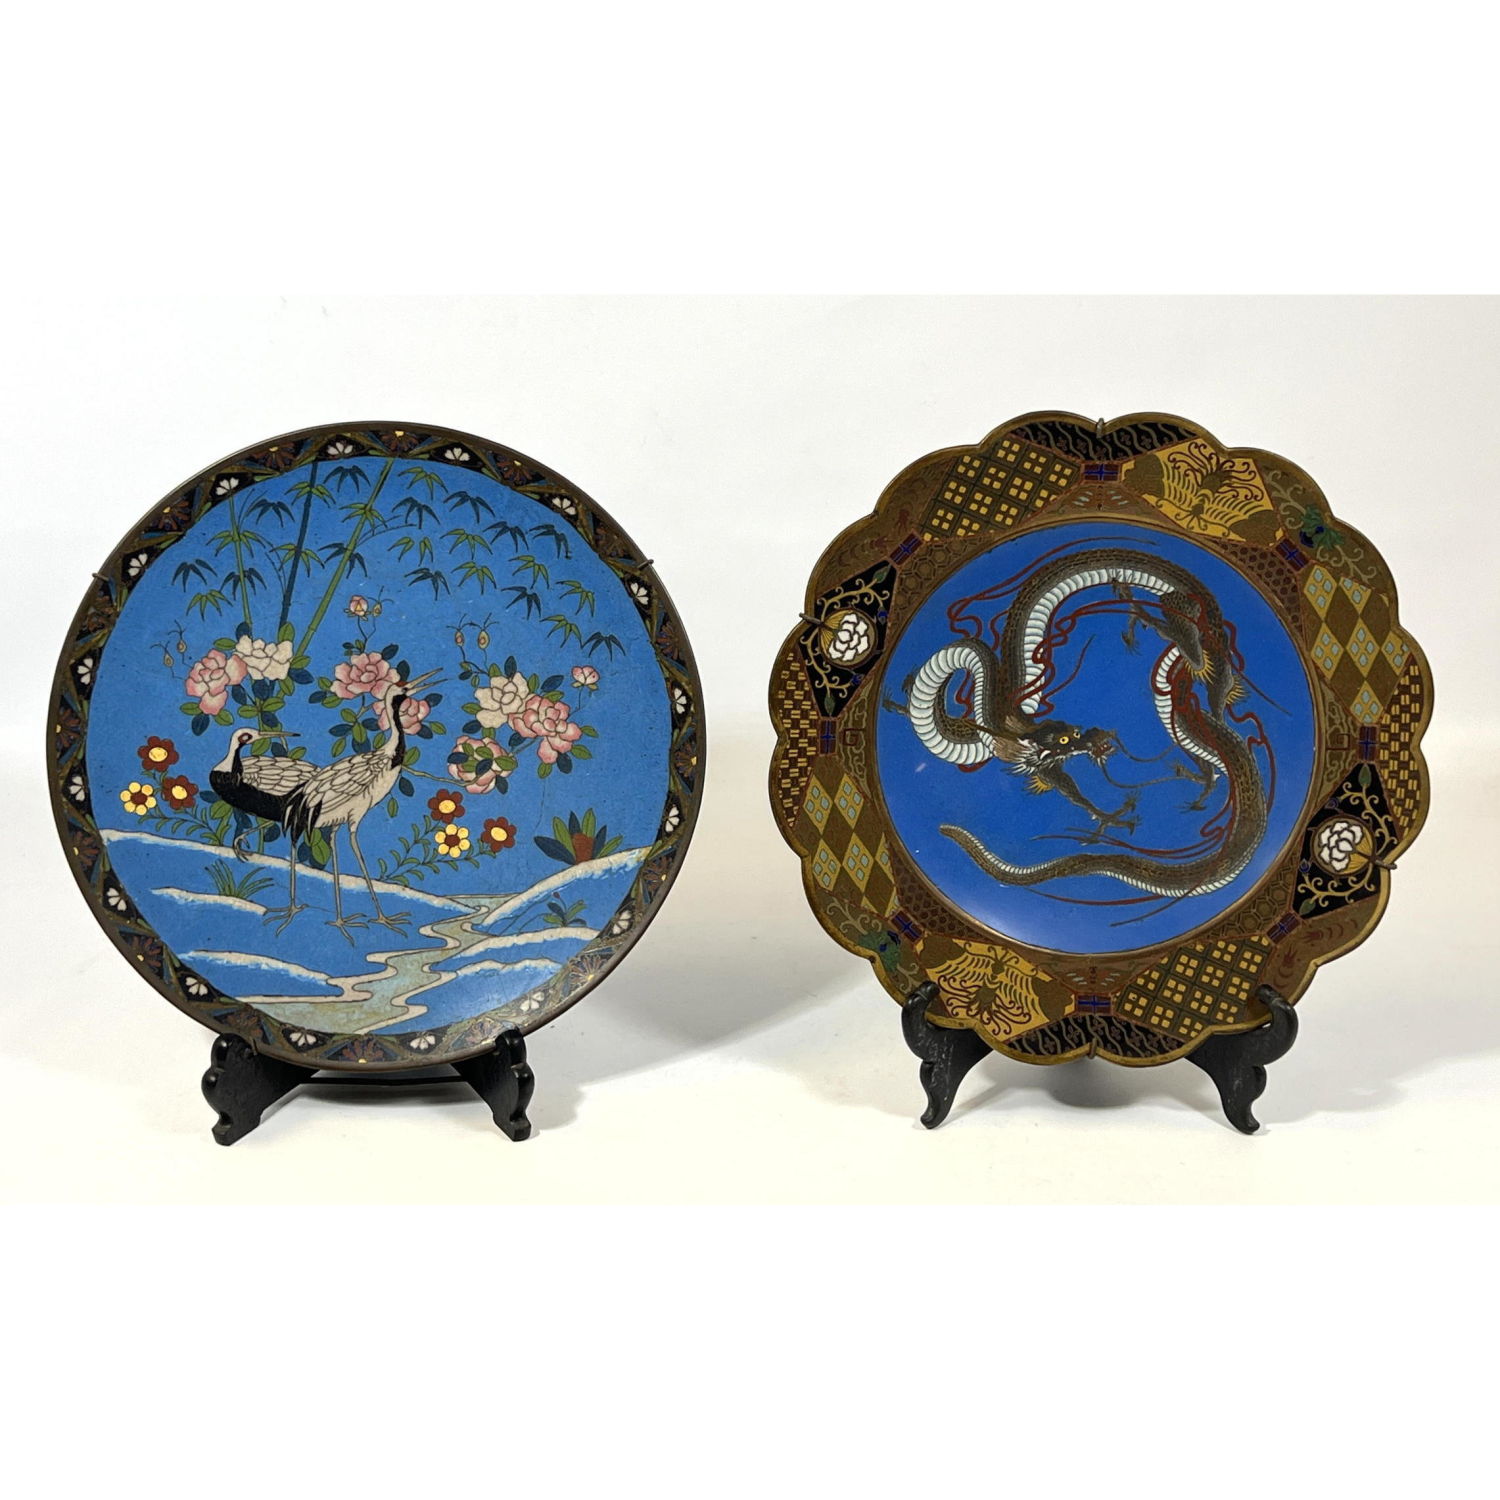 2pc Cloisonne charger plates. Scalloped